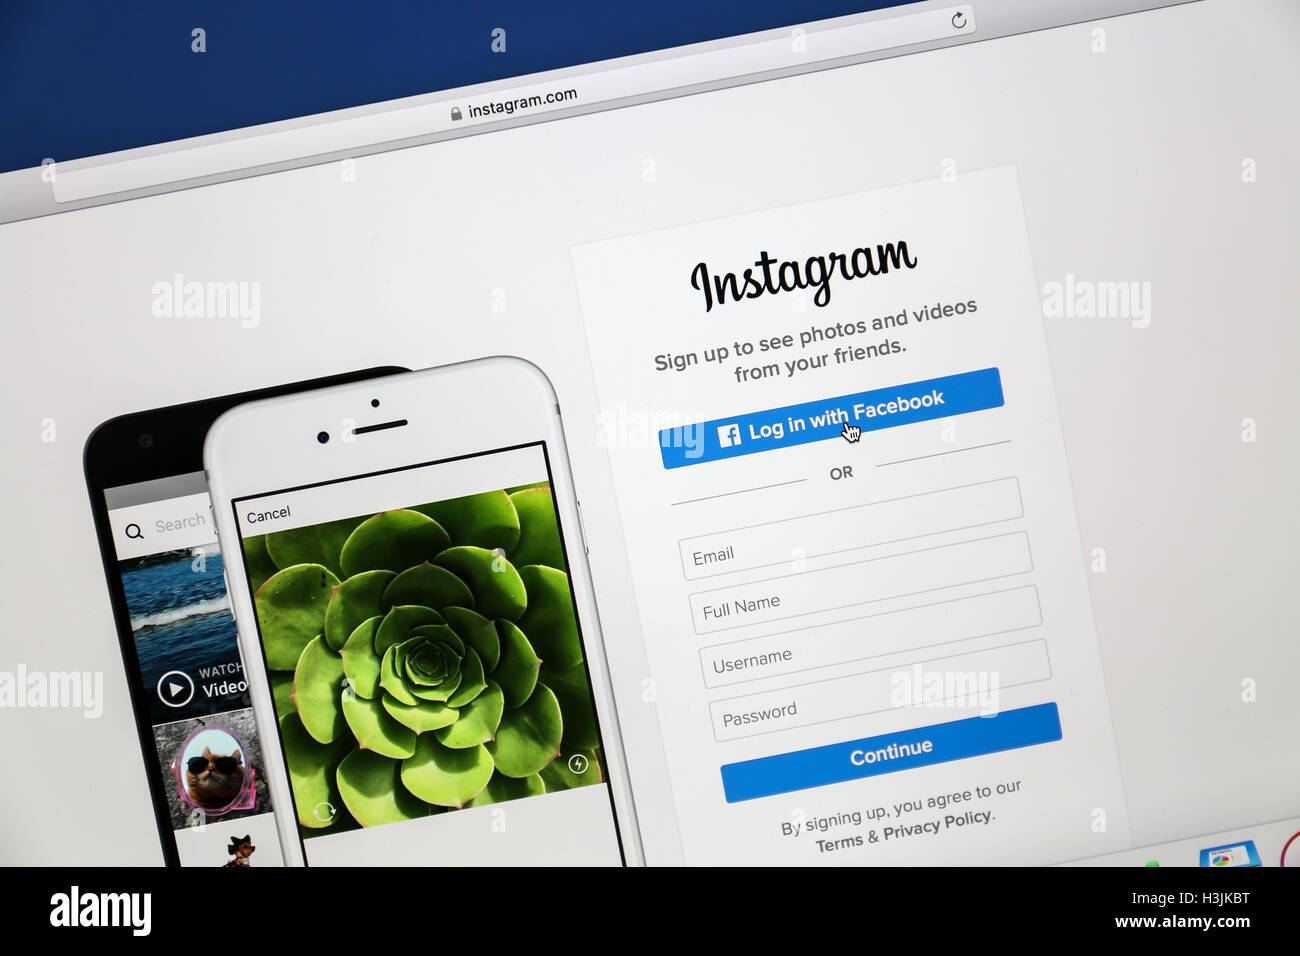 Instagram web page on a computer screen Stock Photo